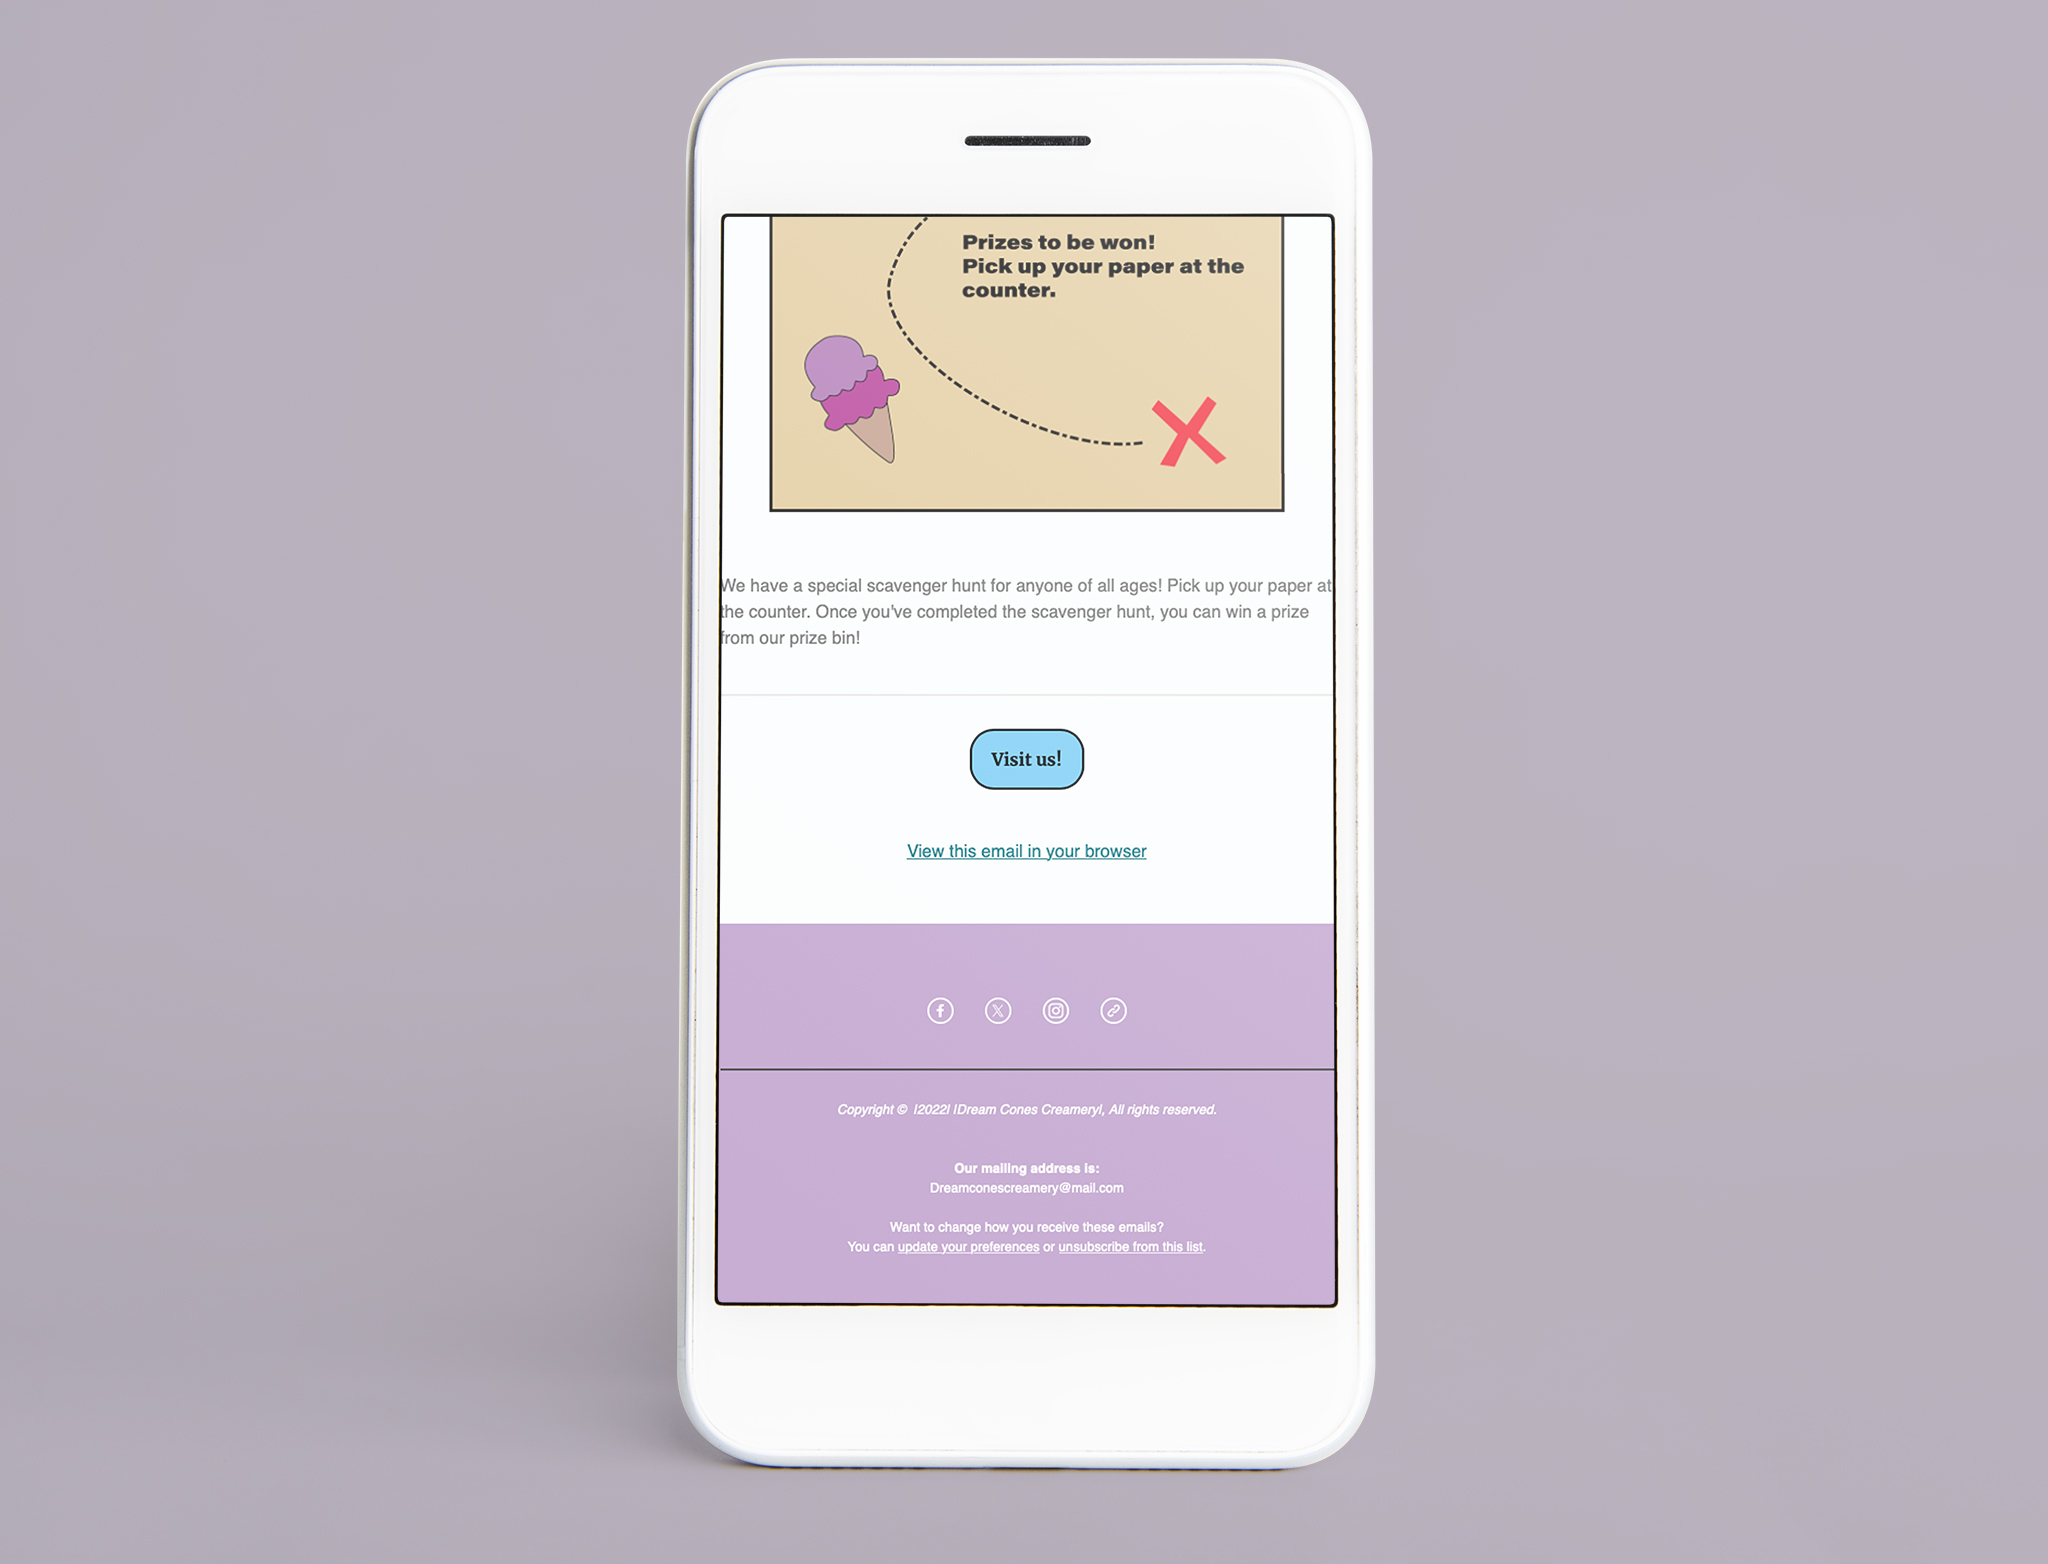 A phone mockup showcasing the business "Dream Cones Creamery" newsletter. 